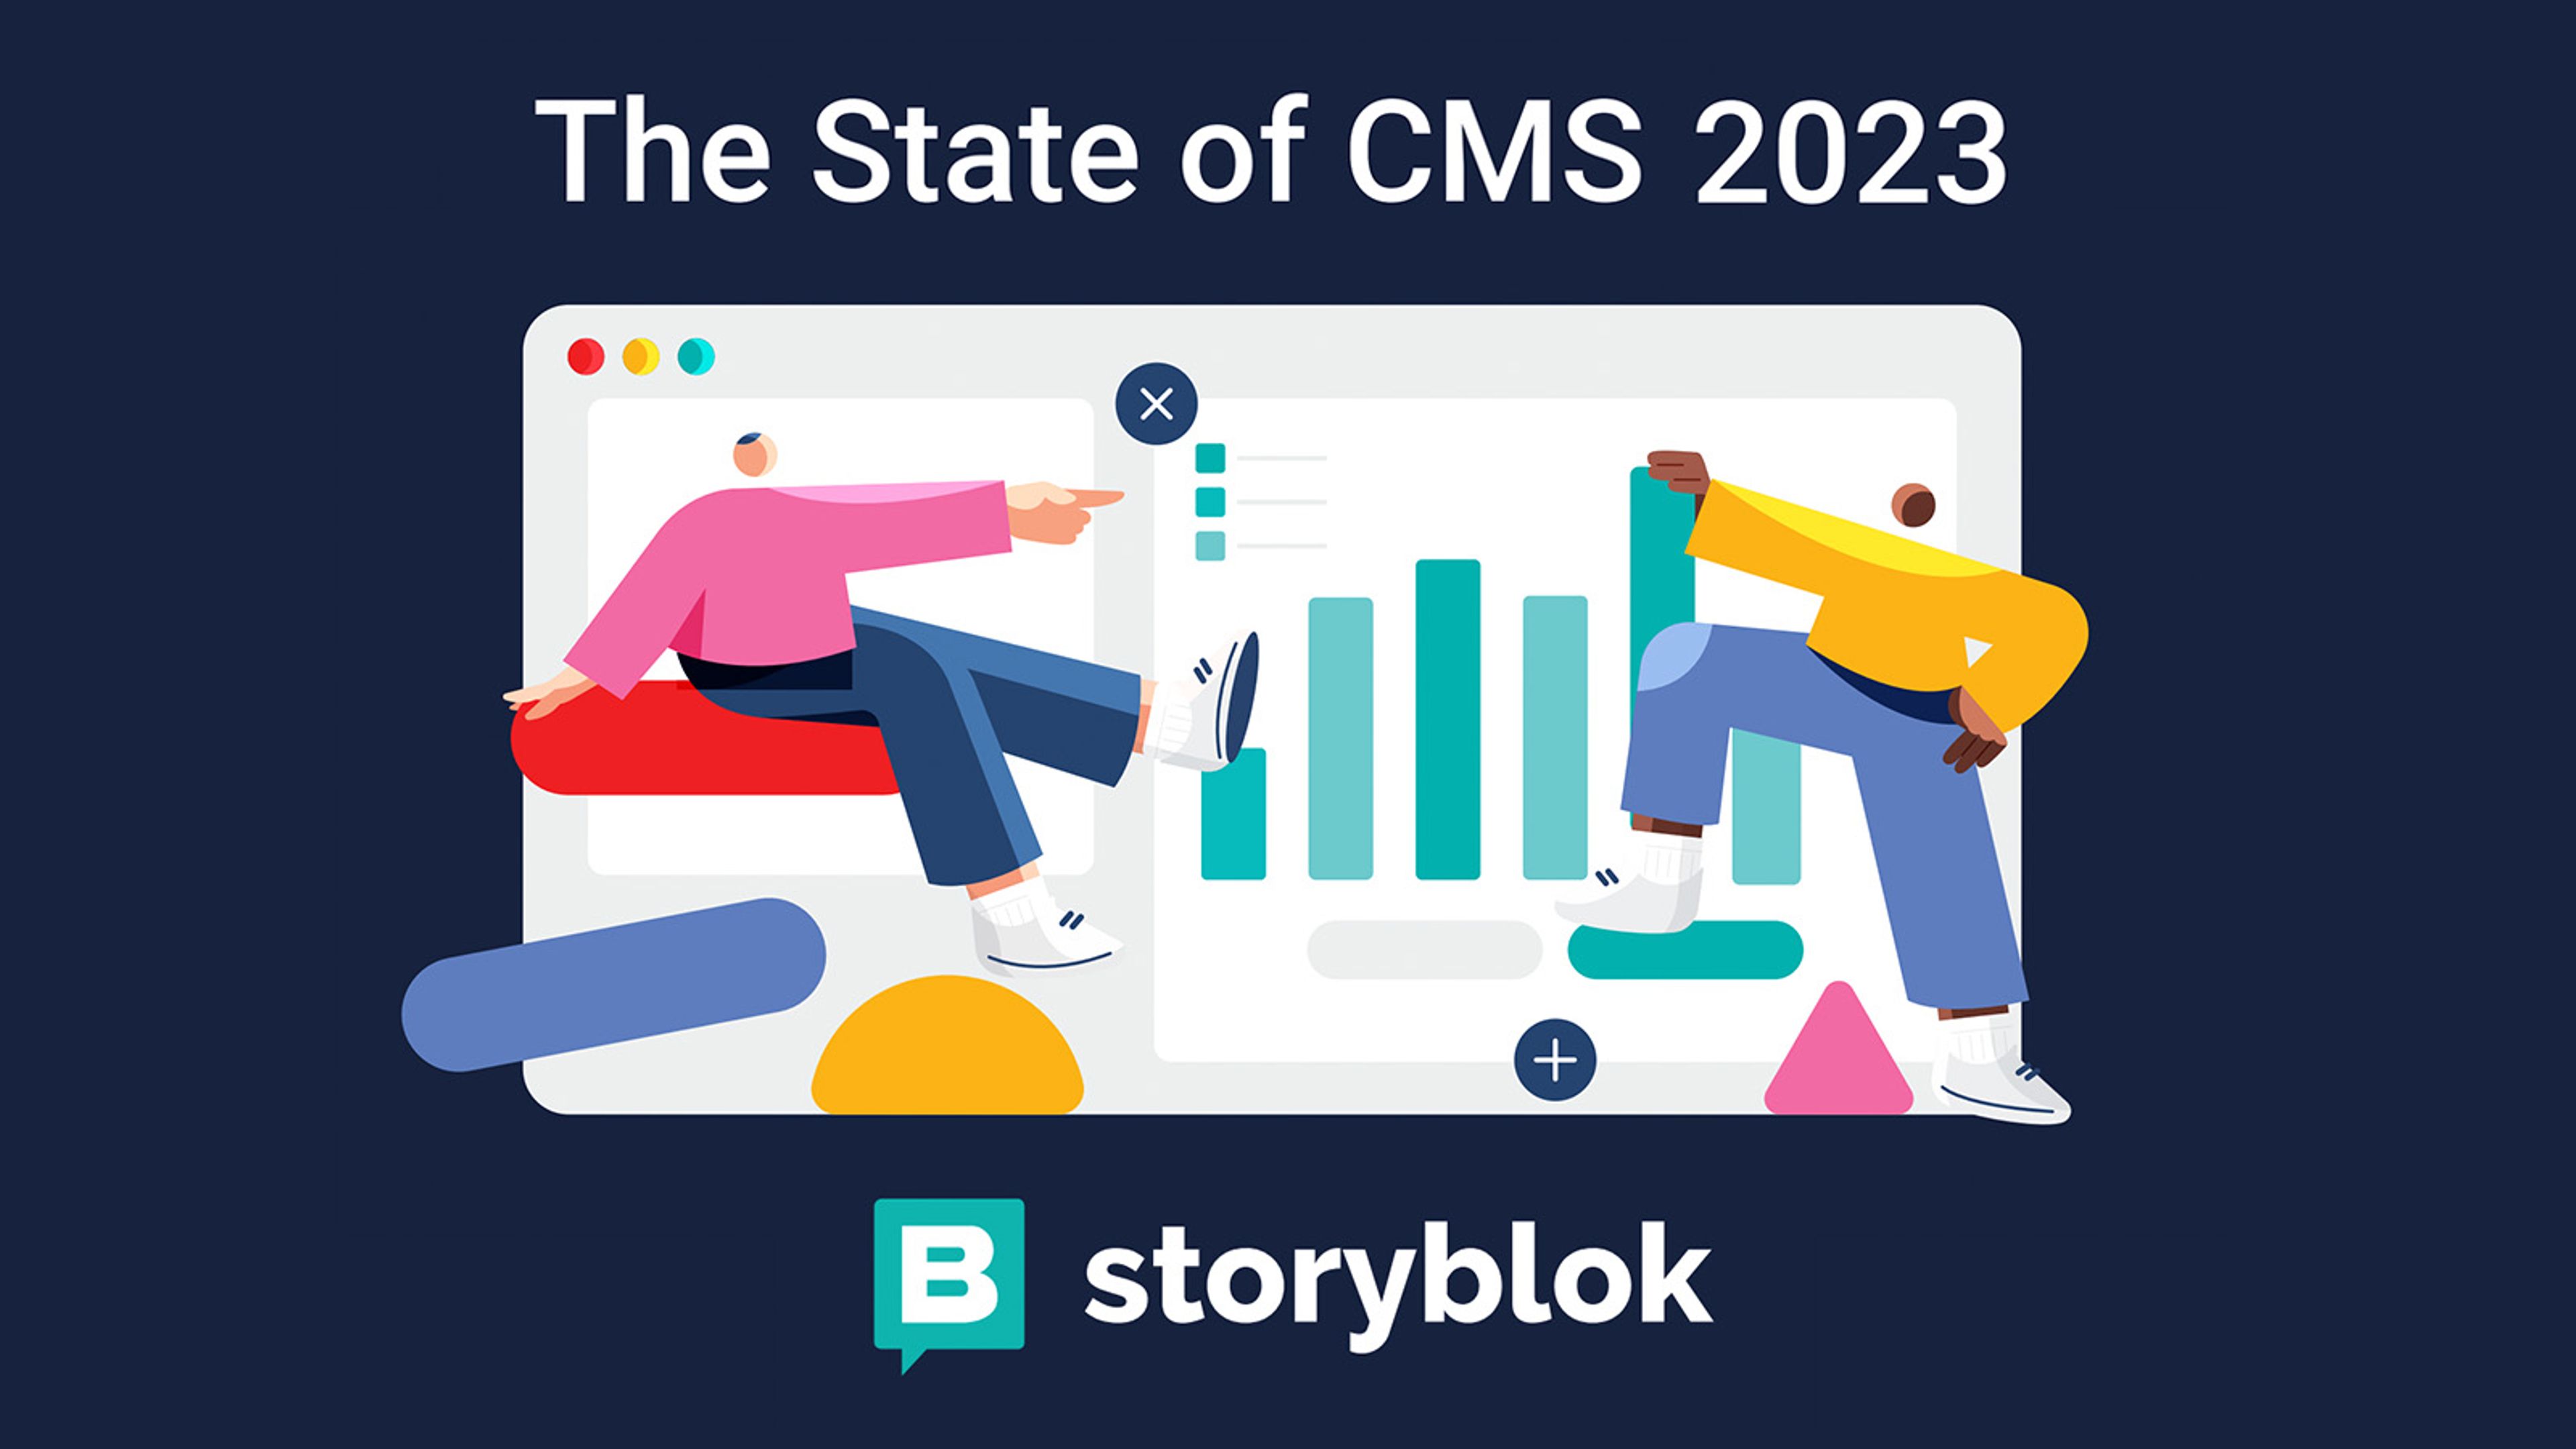 Storyblok State of CMS 2023 graphic and logo